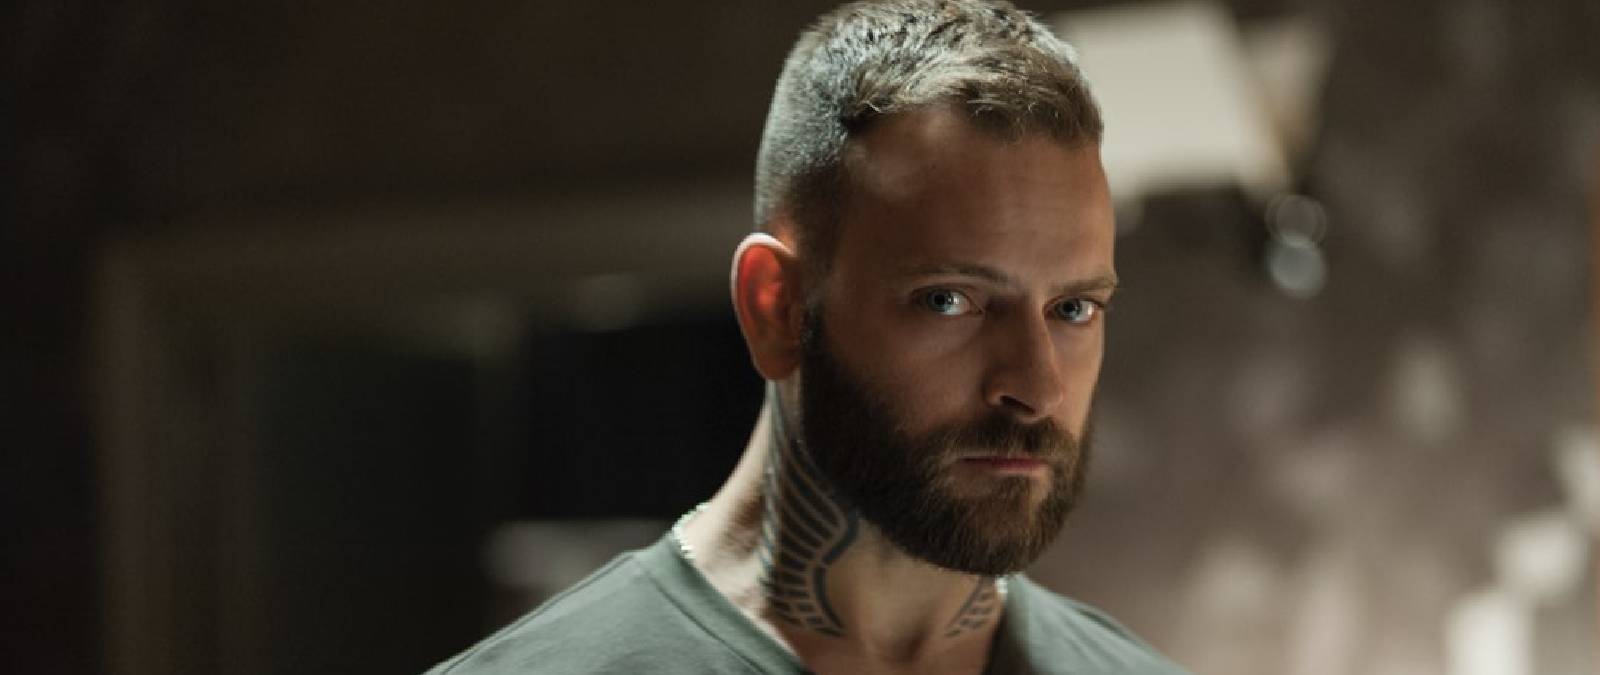 The actor's craft: masterclass with Alessandro Borghi